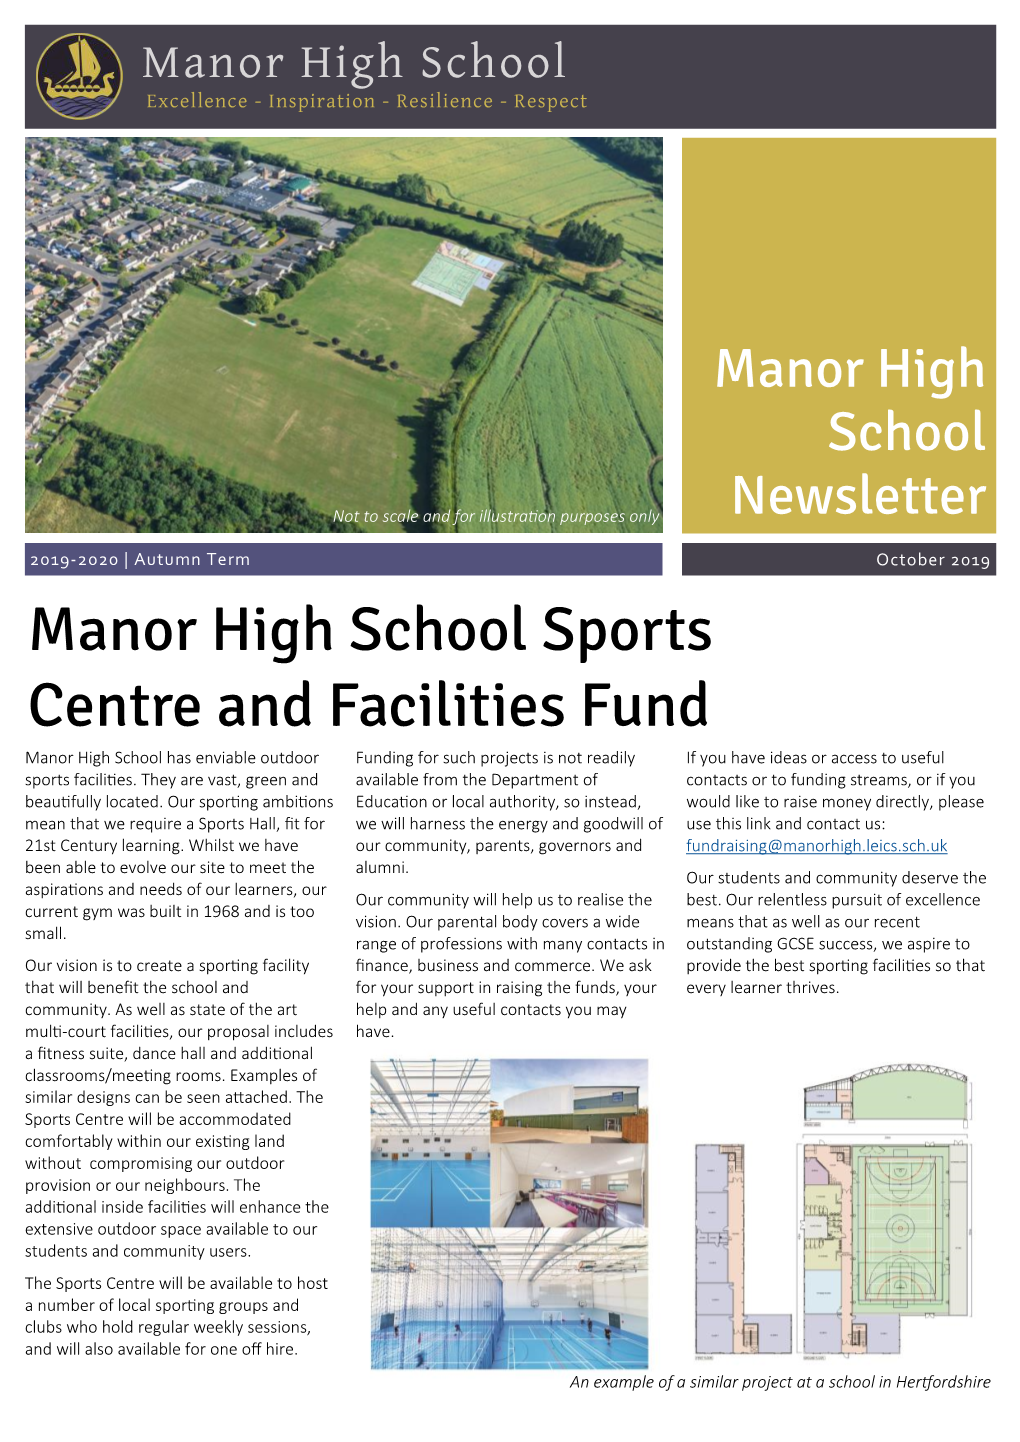 Manor High School Sports Centre and Facilities Fund